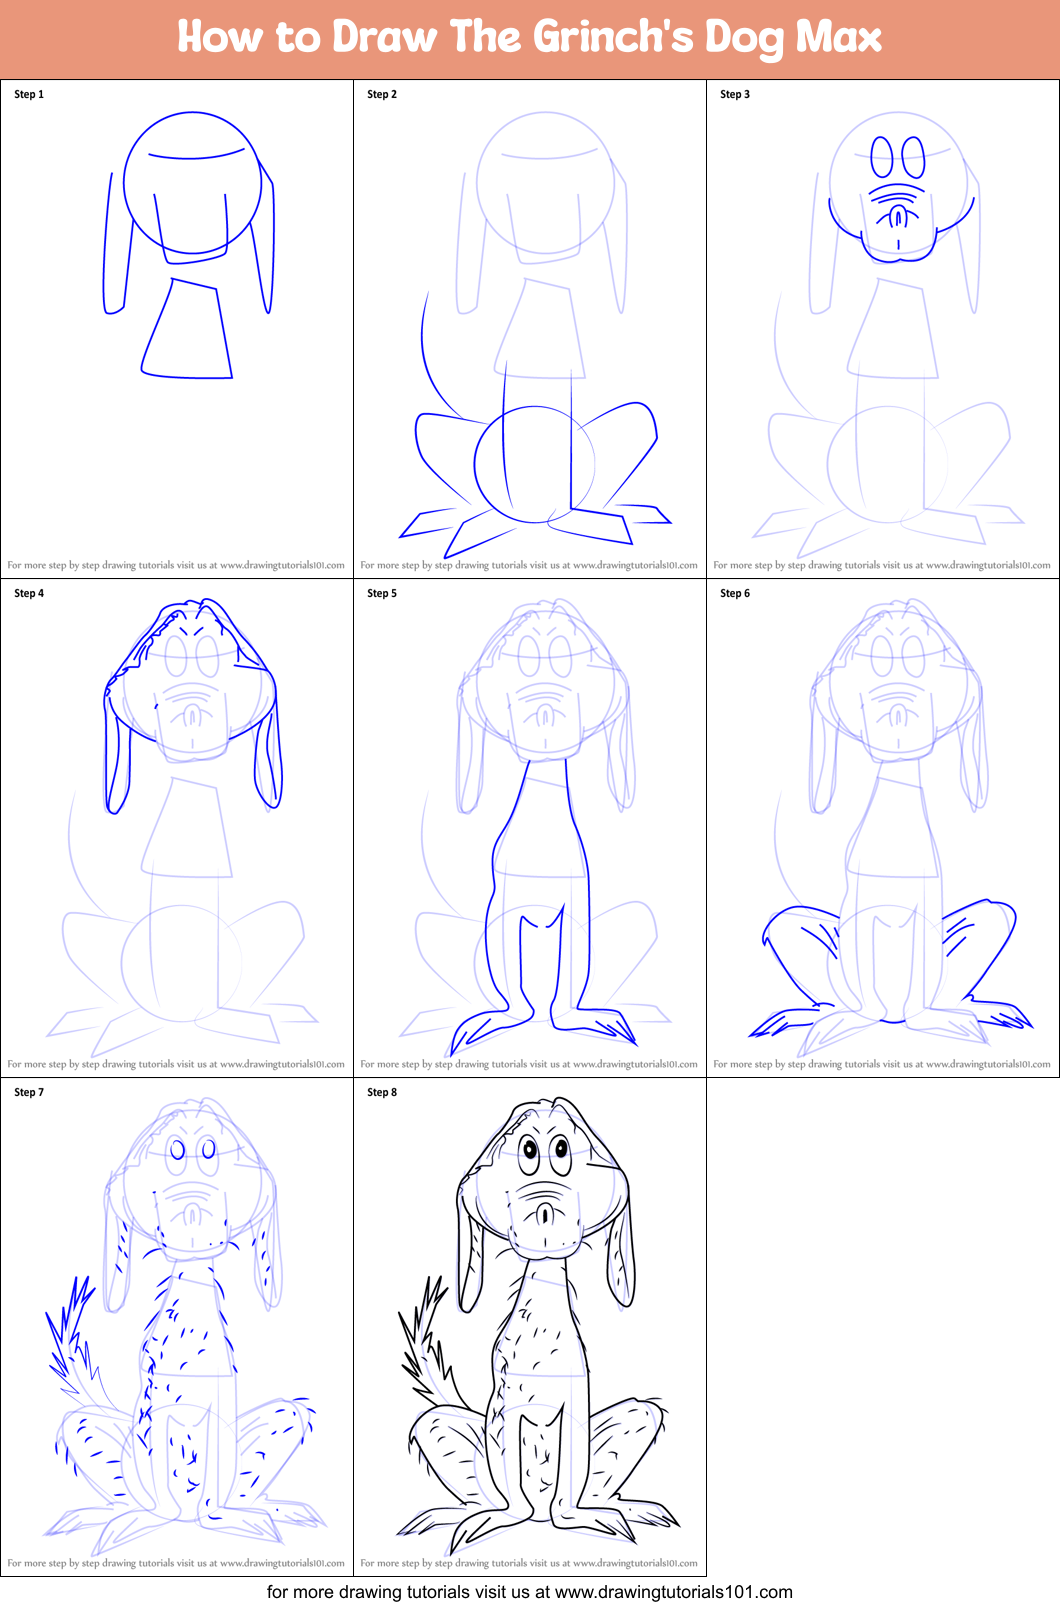 How To Draw Max The Dog From The Grinch Step By Step vrogue.co